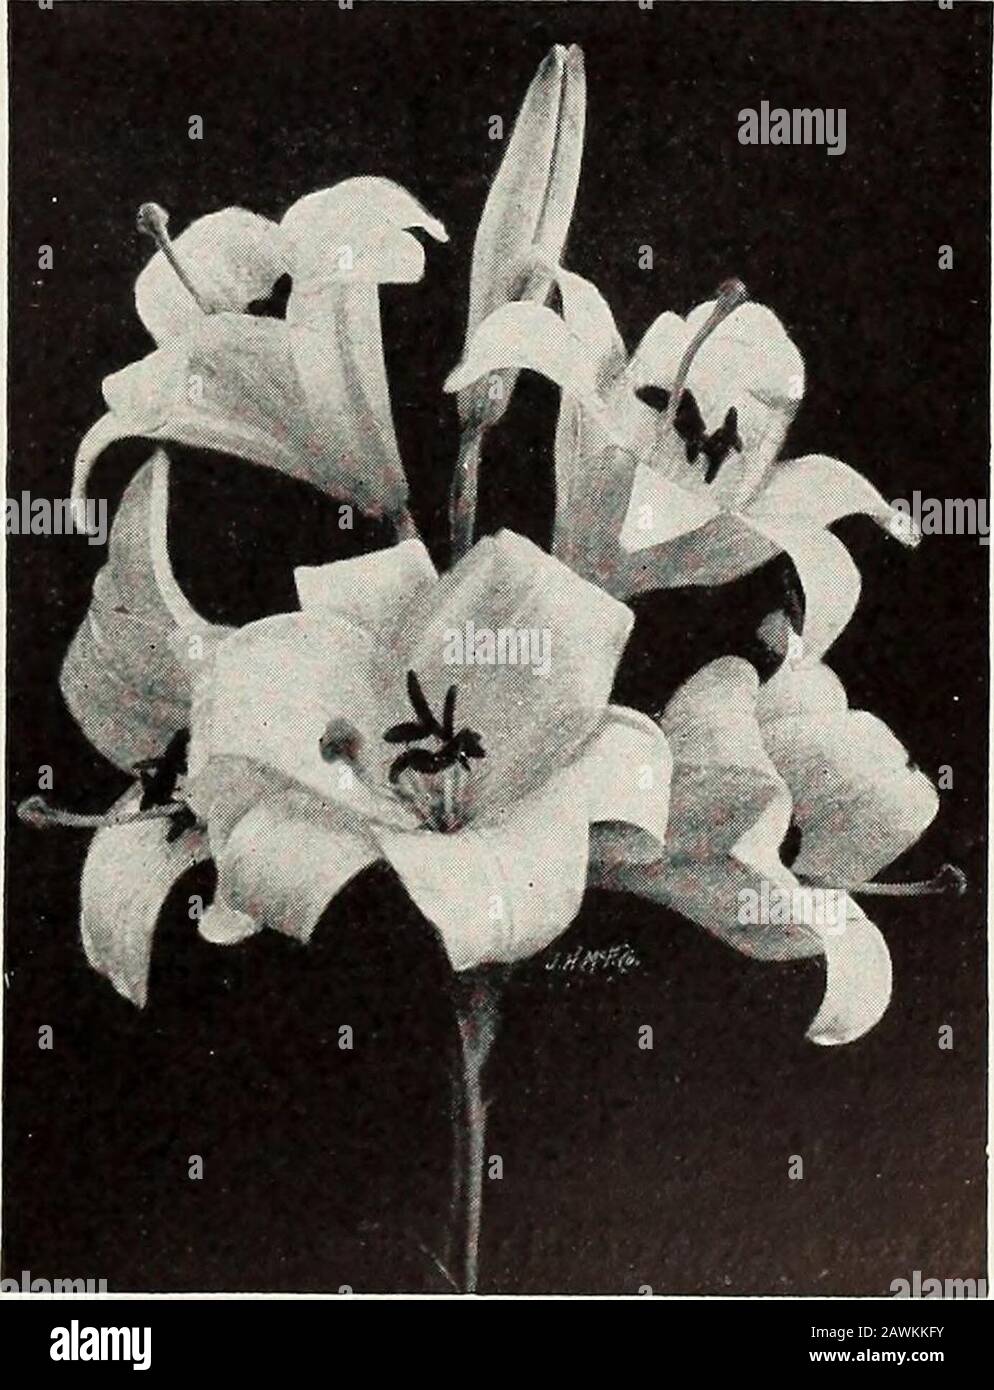 Rawson's bulb hand book / W.WRawson & Co. . $0 20 $2 00 $1(1 (1(1 XMMOlH Hll HS 35 i•J ^nou 2(1 III! 50 5 50 45 uo Speciosum roseum (Pink Japan Lily). White shaded ami spotted dark rose. Lakue Bul,bs 15 I 50 10 00 25 2 50 18 00 .luMBi) Bulbs 40 4 00 30 00 Speciosum rubrum (Red Japan Lily). White suflused and spot- ted crimson. Large Bulbs 15 1 50 10 00 25 2 50 18 no Ju.MBo Bt i.ns 40 4 00 30 00 Speciosum Melpomene. Large; deep crimson, heavily spotted ,.. 20 2 00 15 00 Speciosum magnificum. New. Most intensely colored of allSpeciosum varieties. A largeclump i)f these Lilies will makea wonderfu Stock Photo